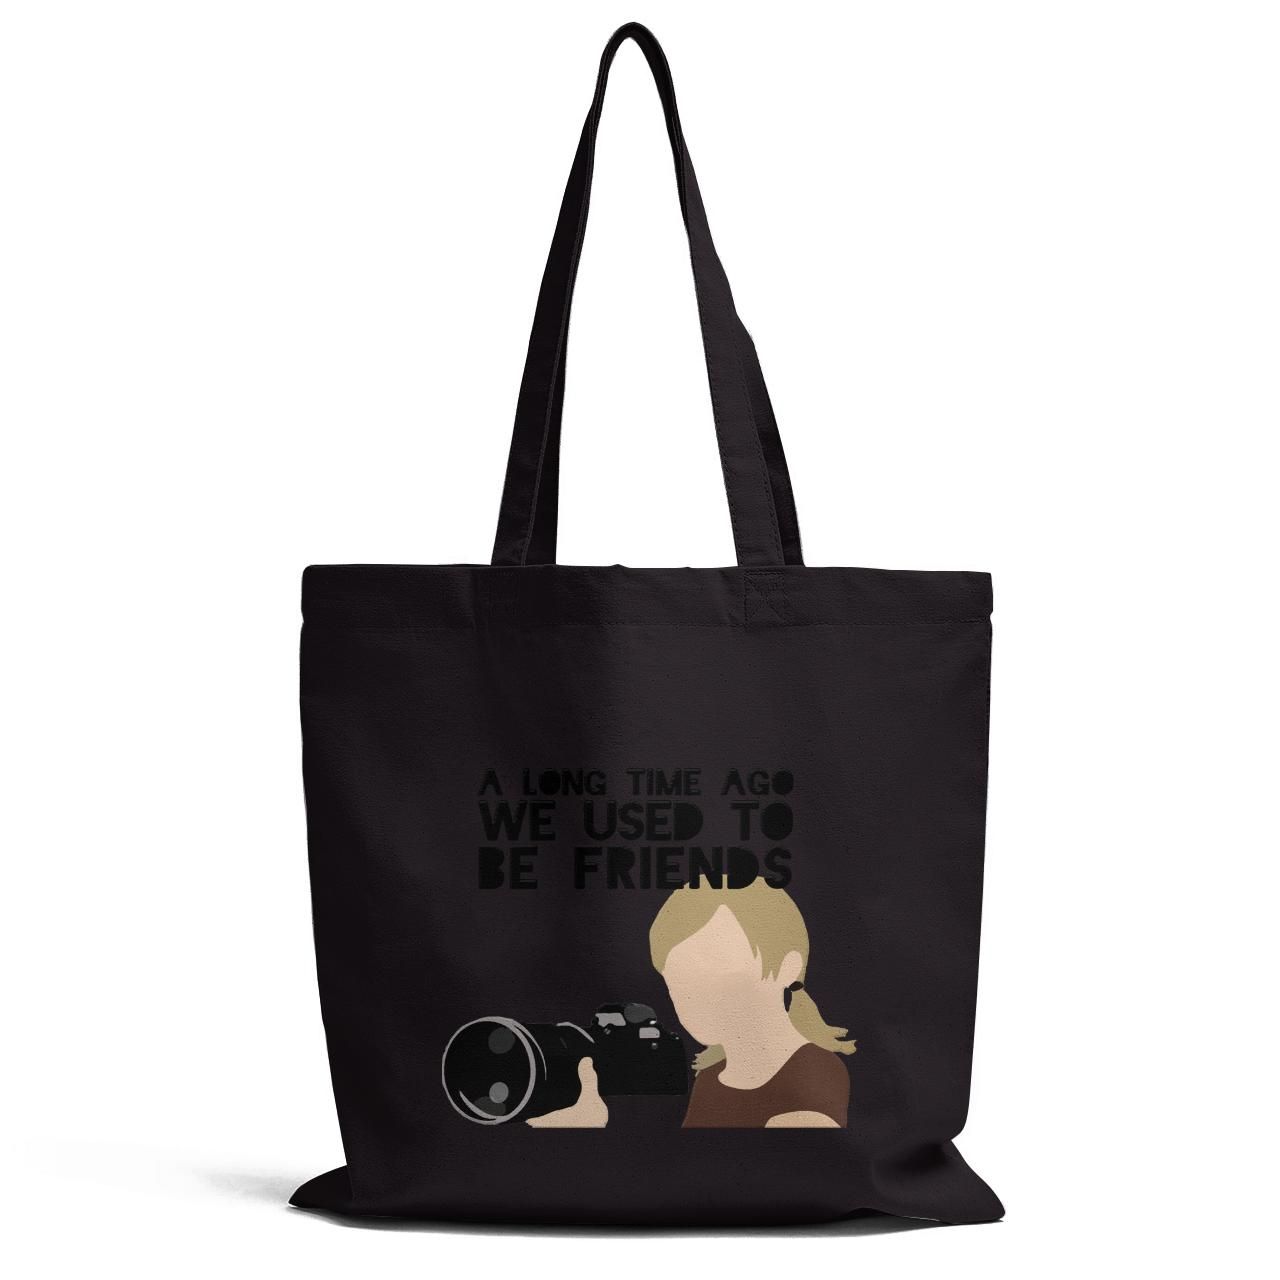 A Long Time Ago We Used To Be Friends Tote Bag